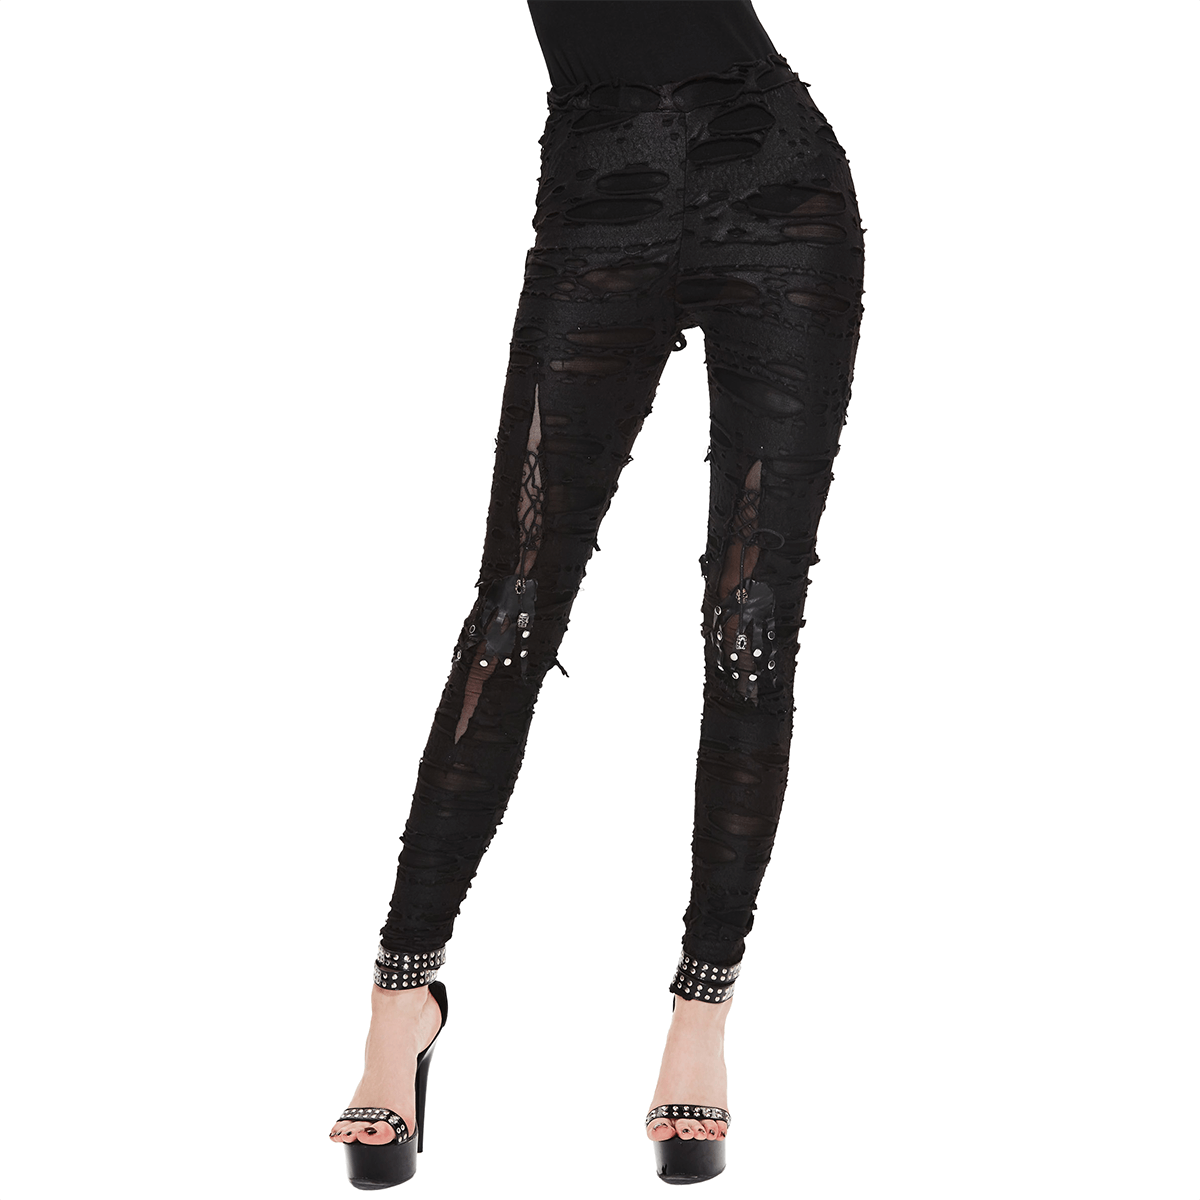 Gothic High Waist Pants for Women / Black Pant with Leather Hand Print on the Knees - HARD'N'HEAVY